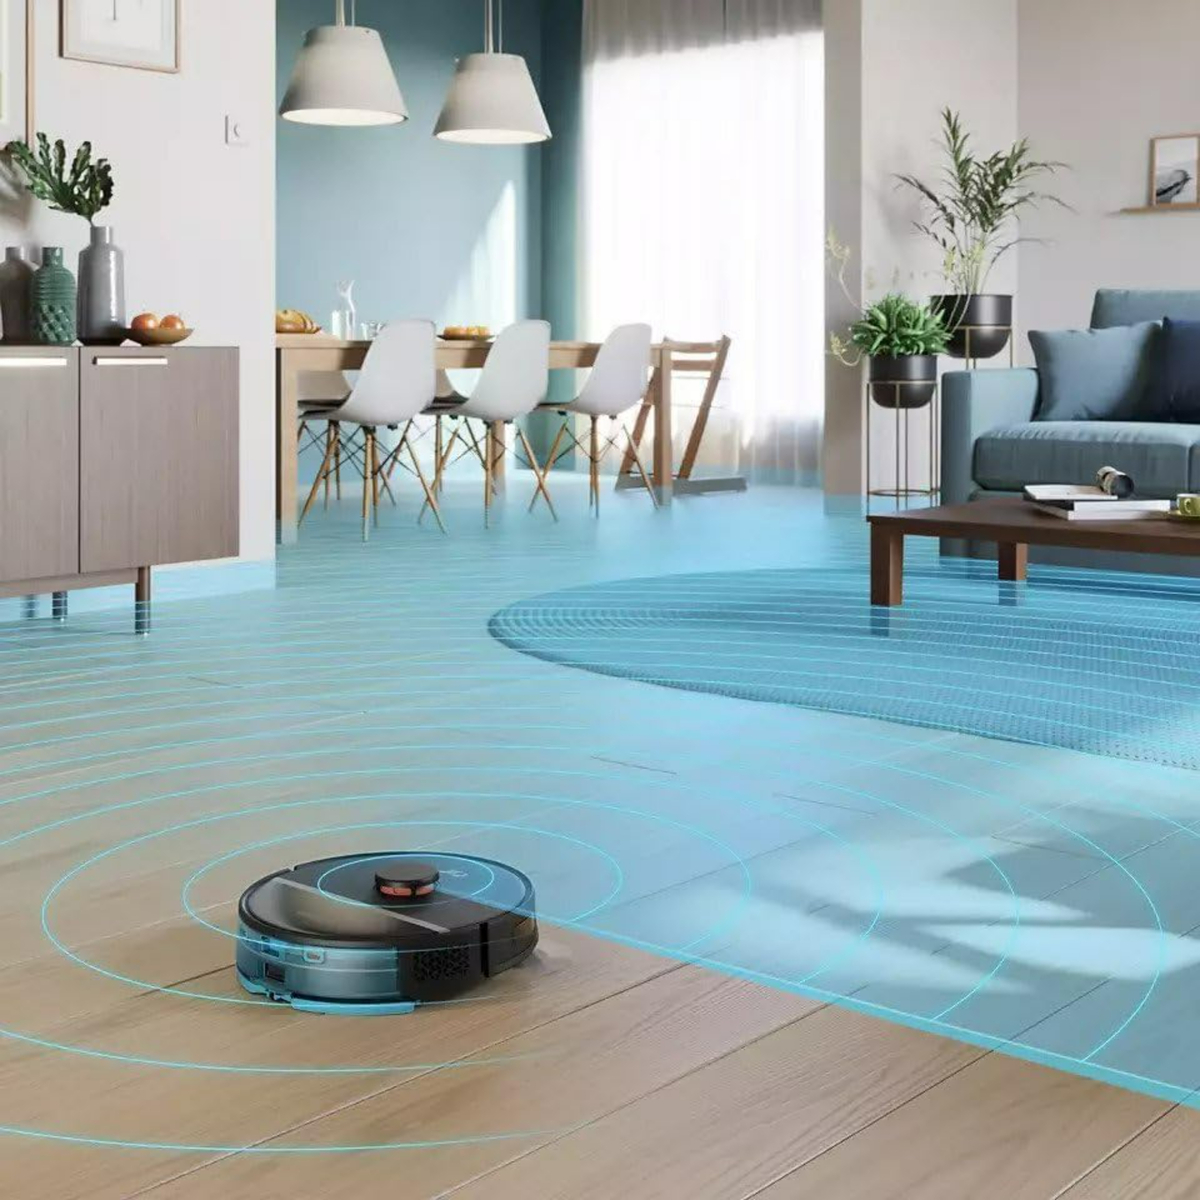 Philips Robotic Daily Wet and Dry Vacuum Cleaner, 4800 W, XU3000/01